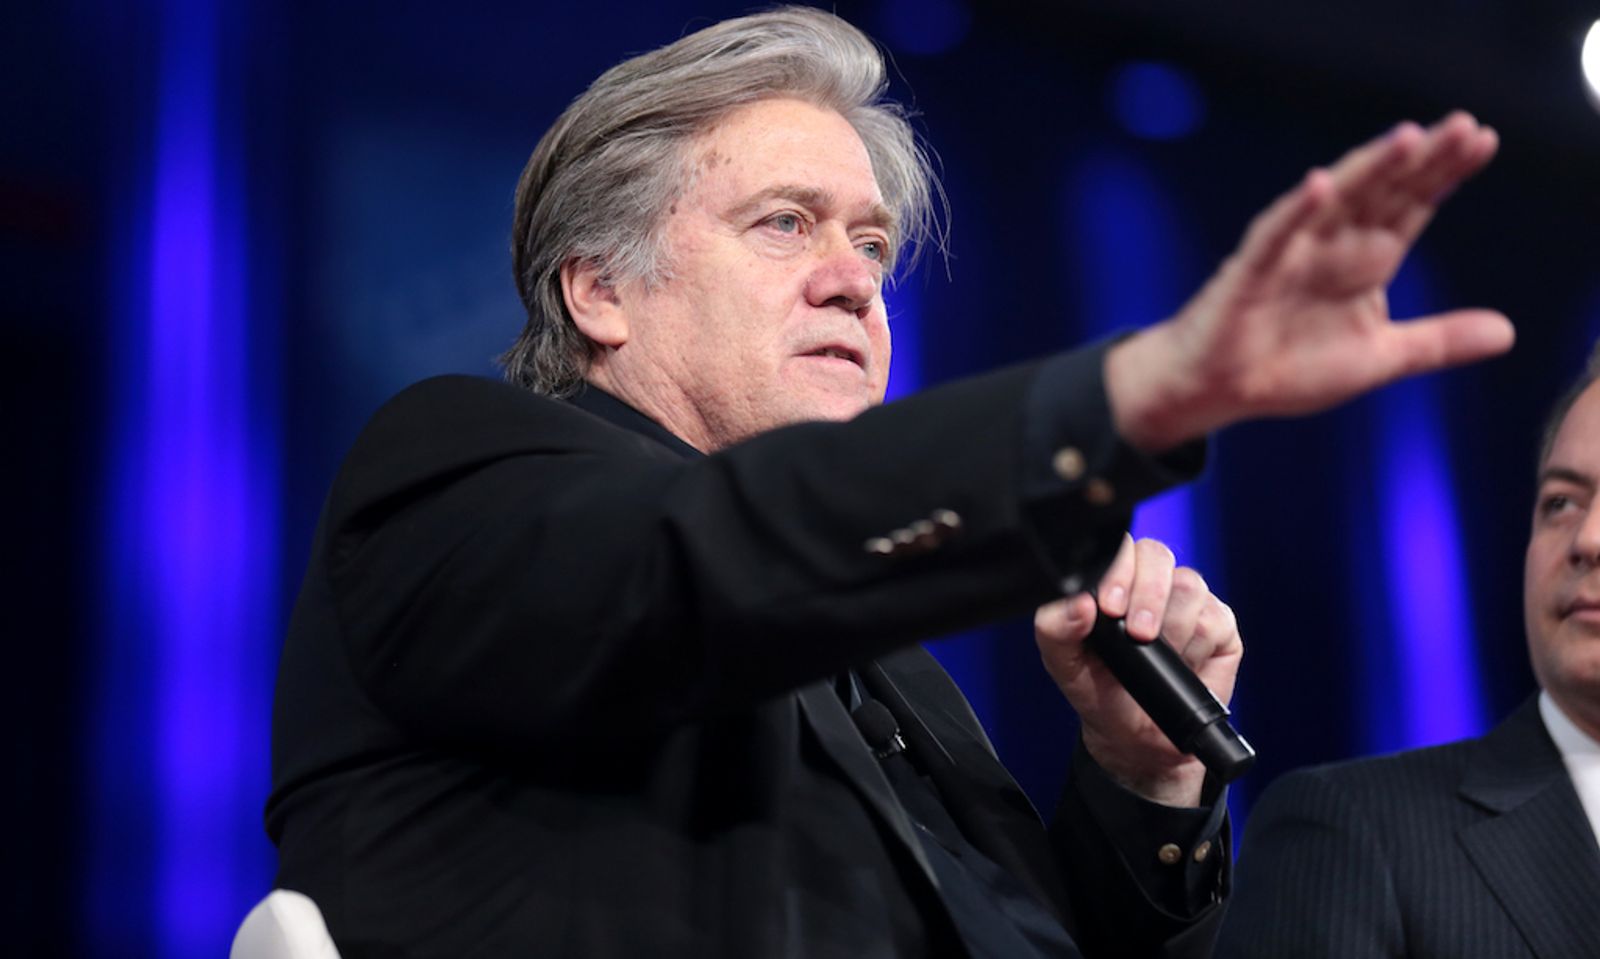 Sex Robot Conference Cancelled Due To Protests Over Steve Bannon